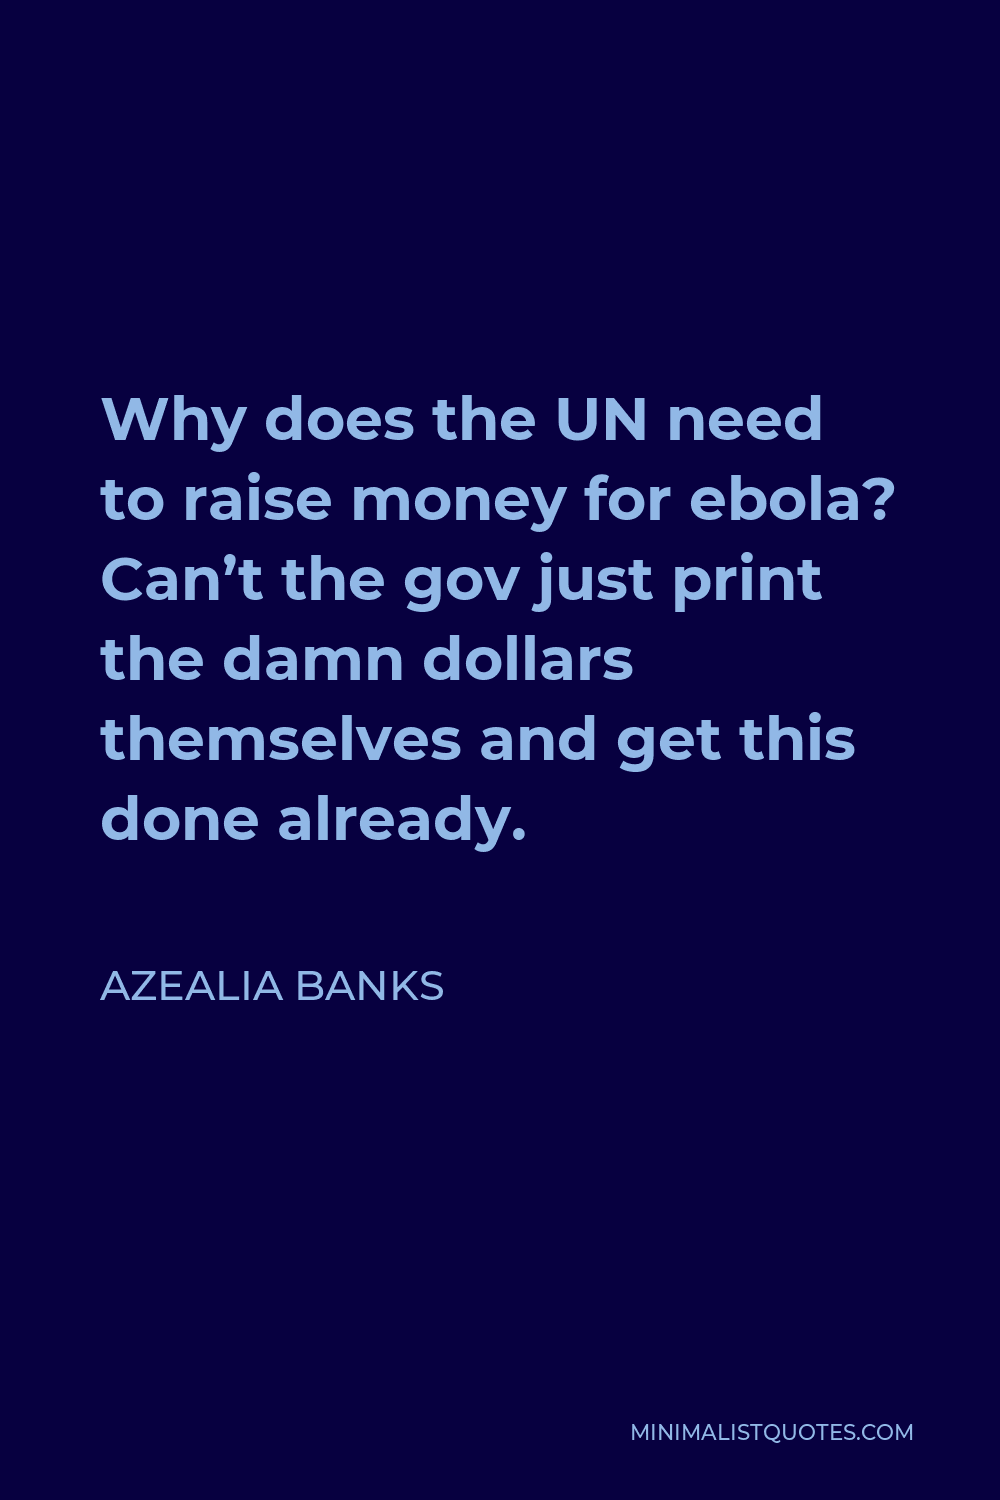 Azealia Banks Quote - Why does the UN need to raise money for ebola? Can’t the gov just print the damn dollars themselves and get this done already.